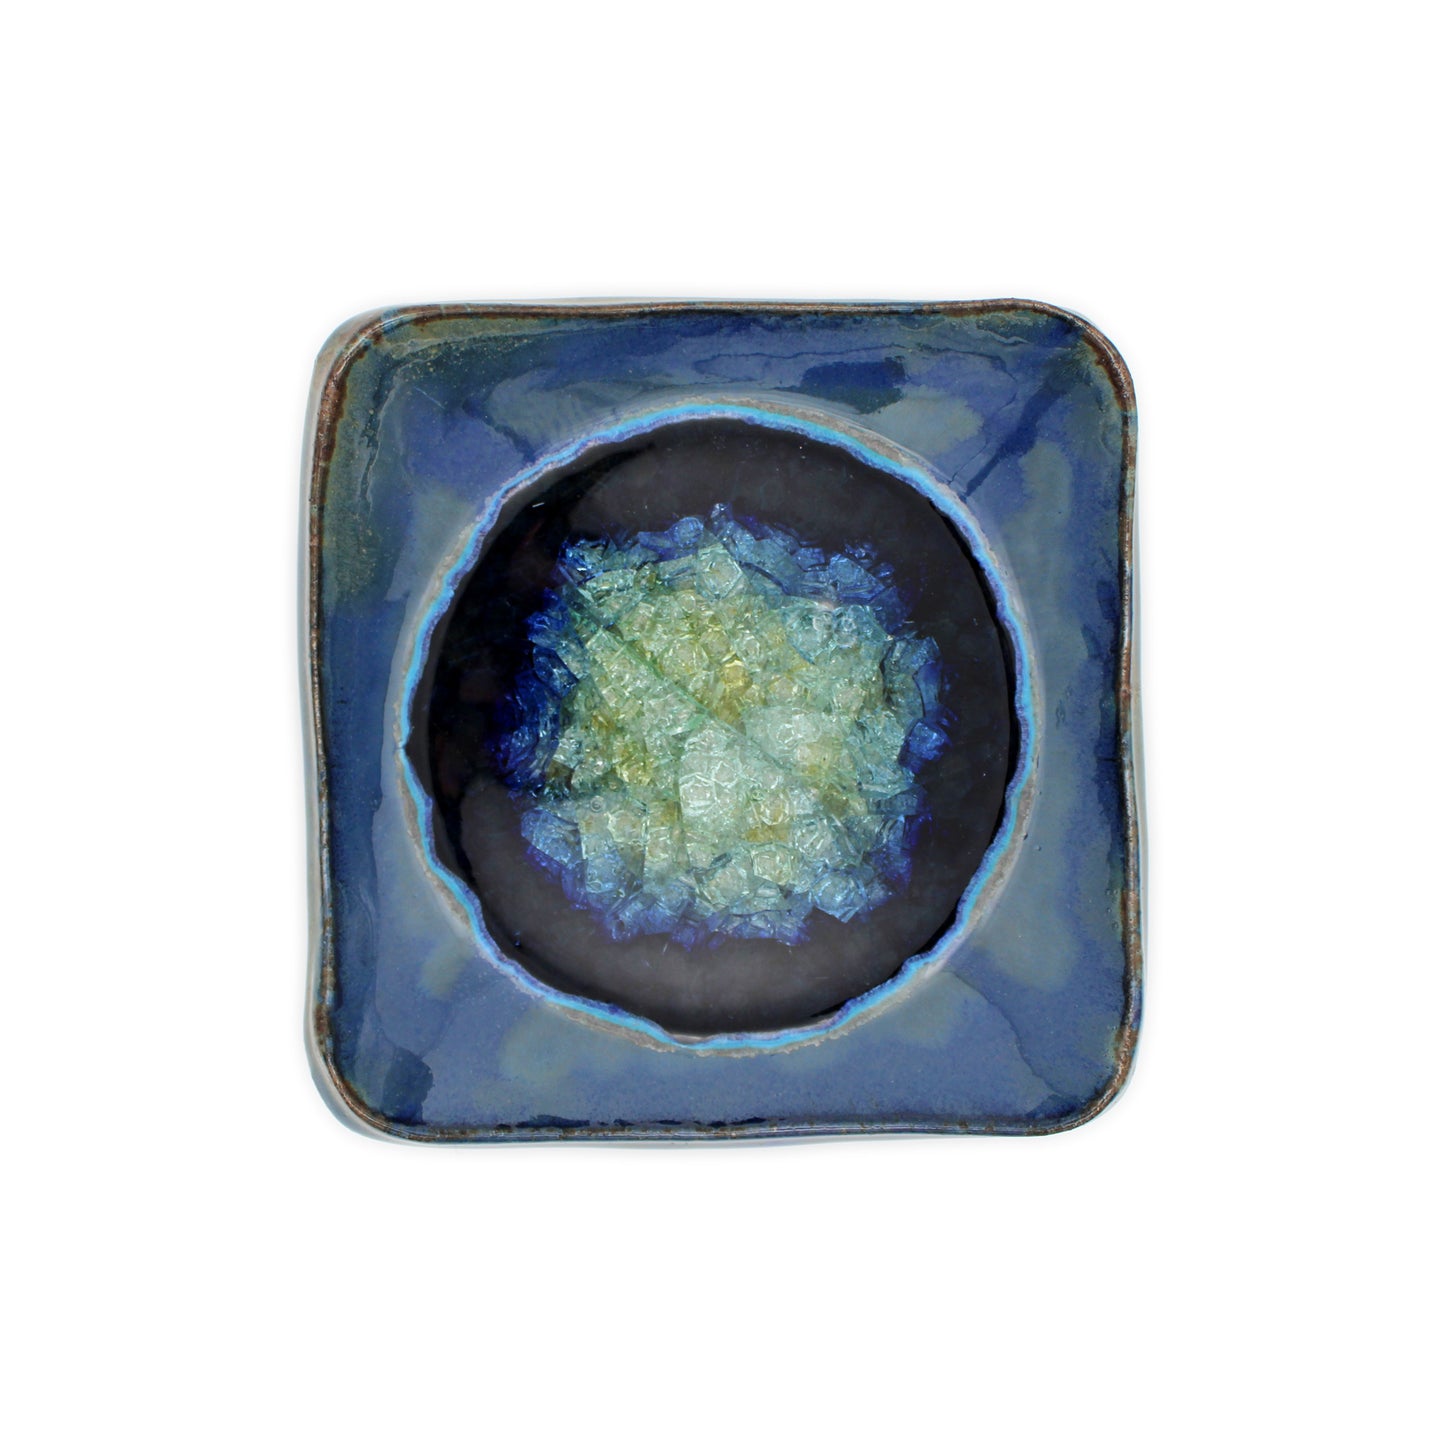 Hand-thrown Wonton Dishes: Blue with Glass